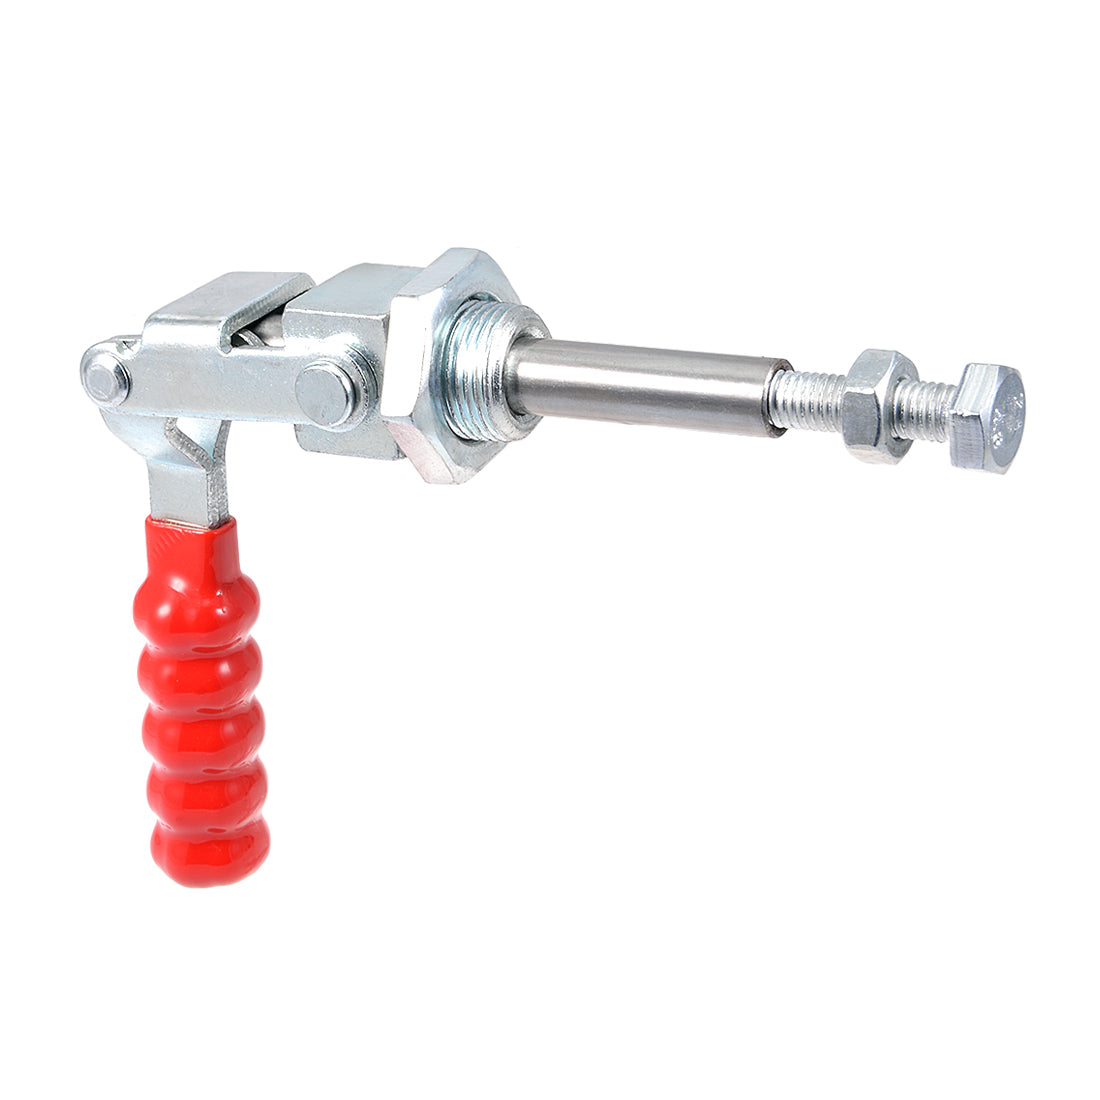 uxcell Uxcell Toggle Clamp 136kg 299lbs Holding Capacity 39mm Stroke Push Pull Action Hand Tool GH-36204M